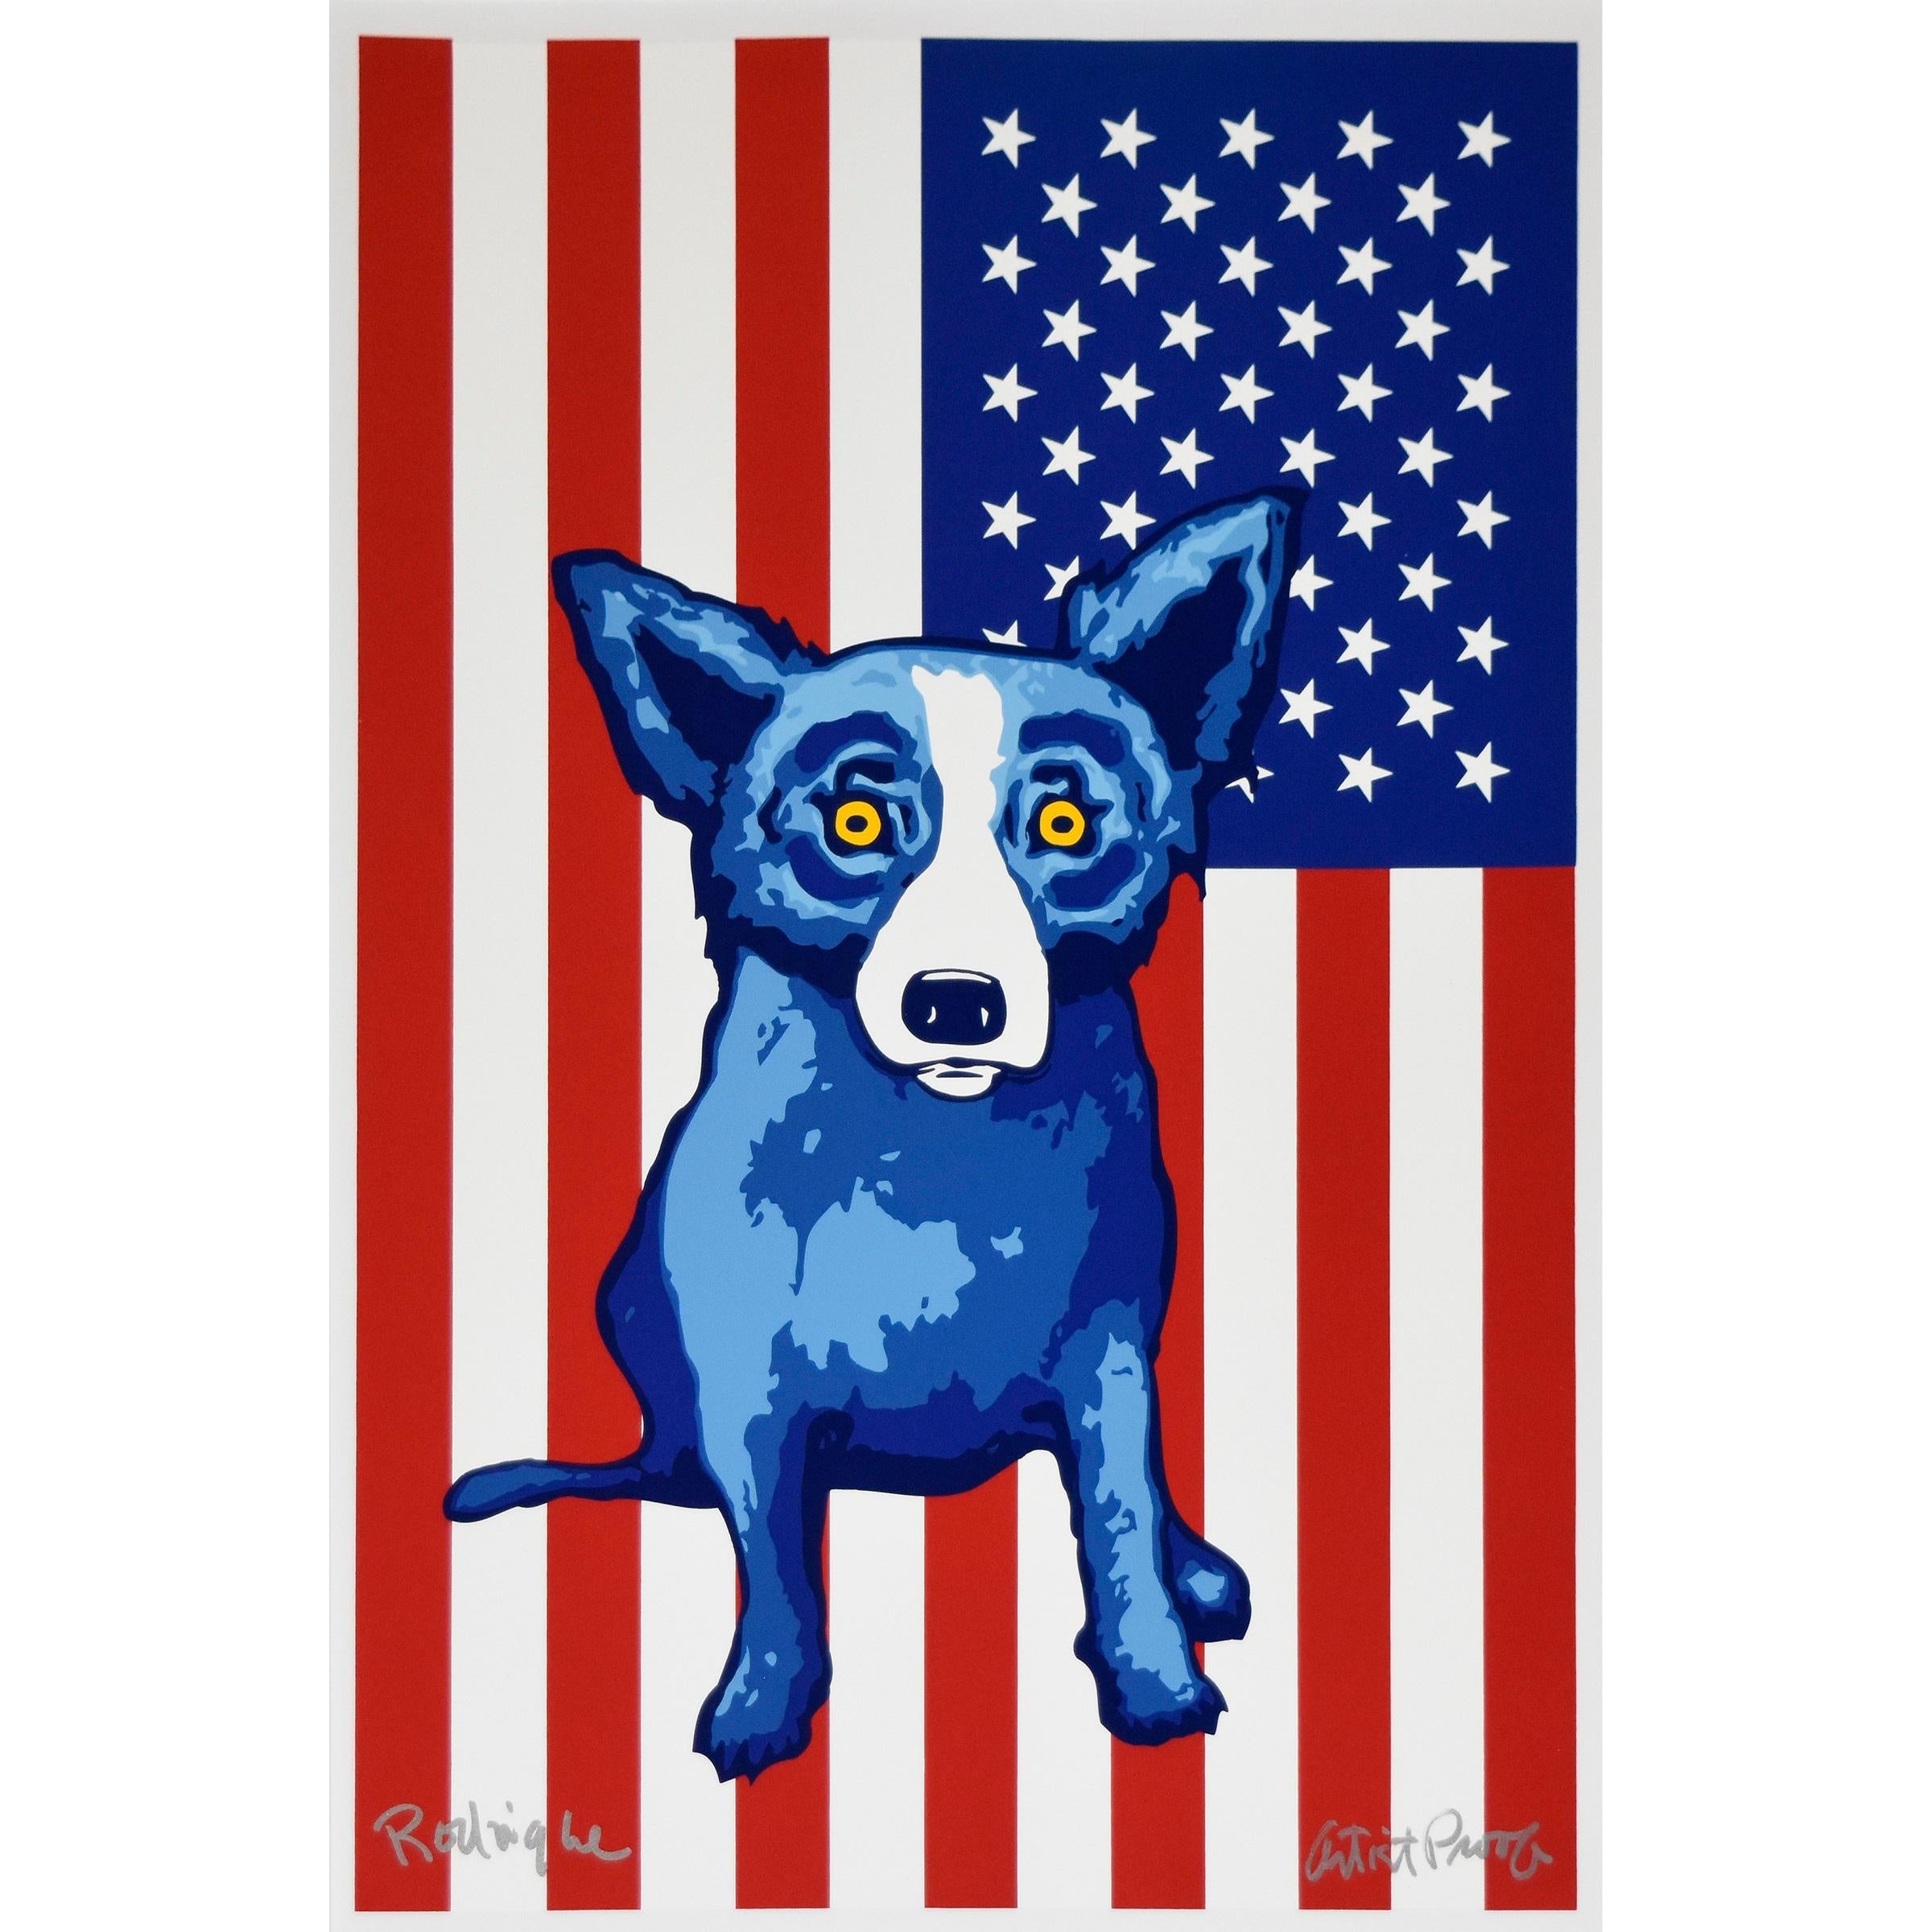 George Rodrigue Animal Print - Blue Dog "Stars and Stripes Forever" Signed Numbered Print